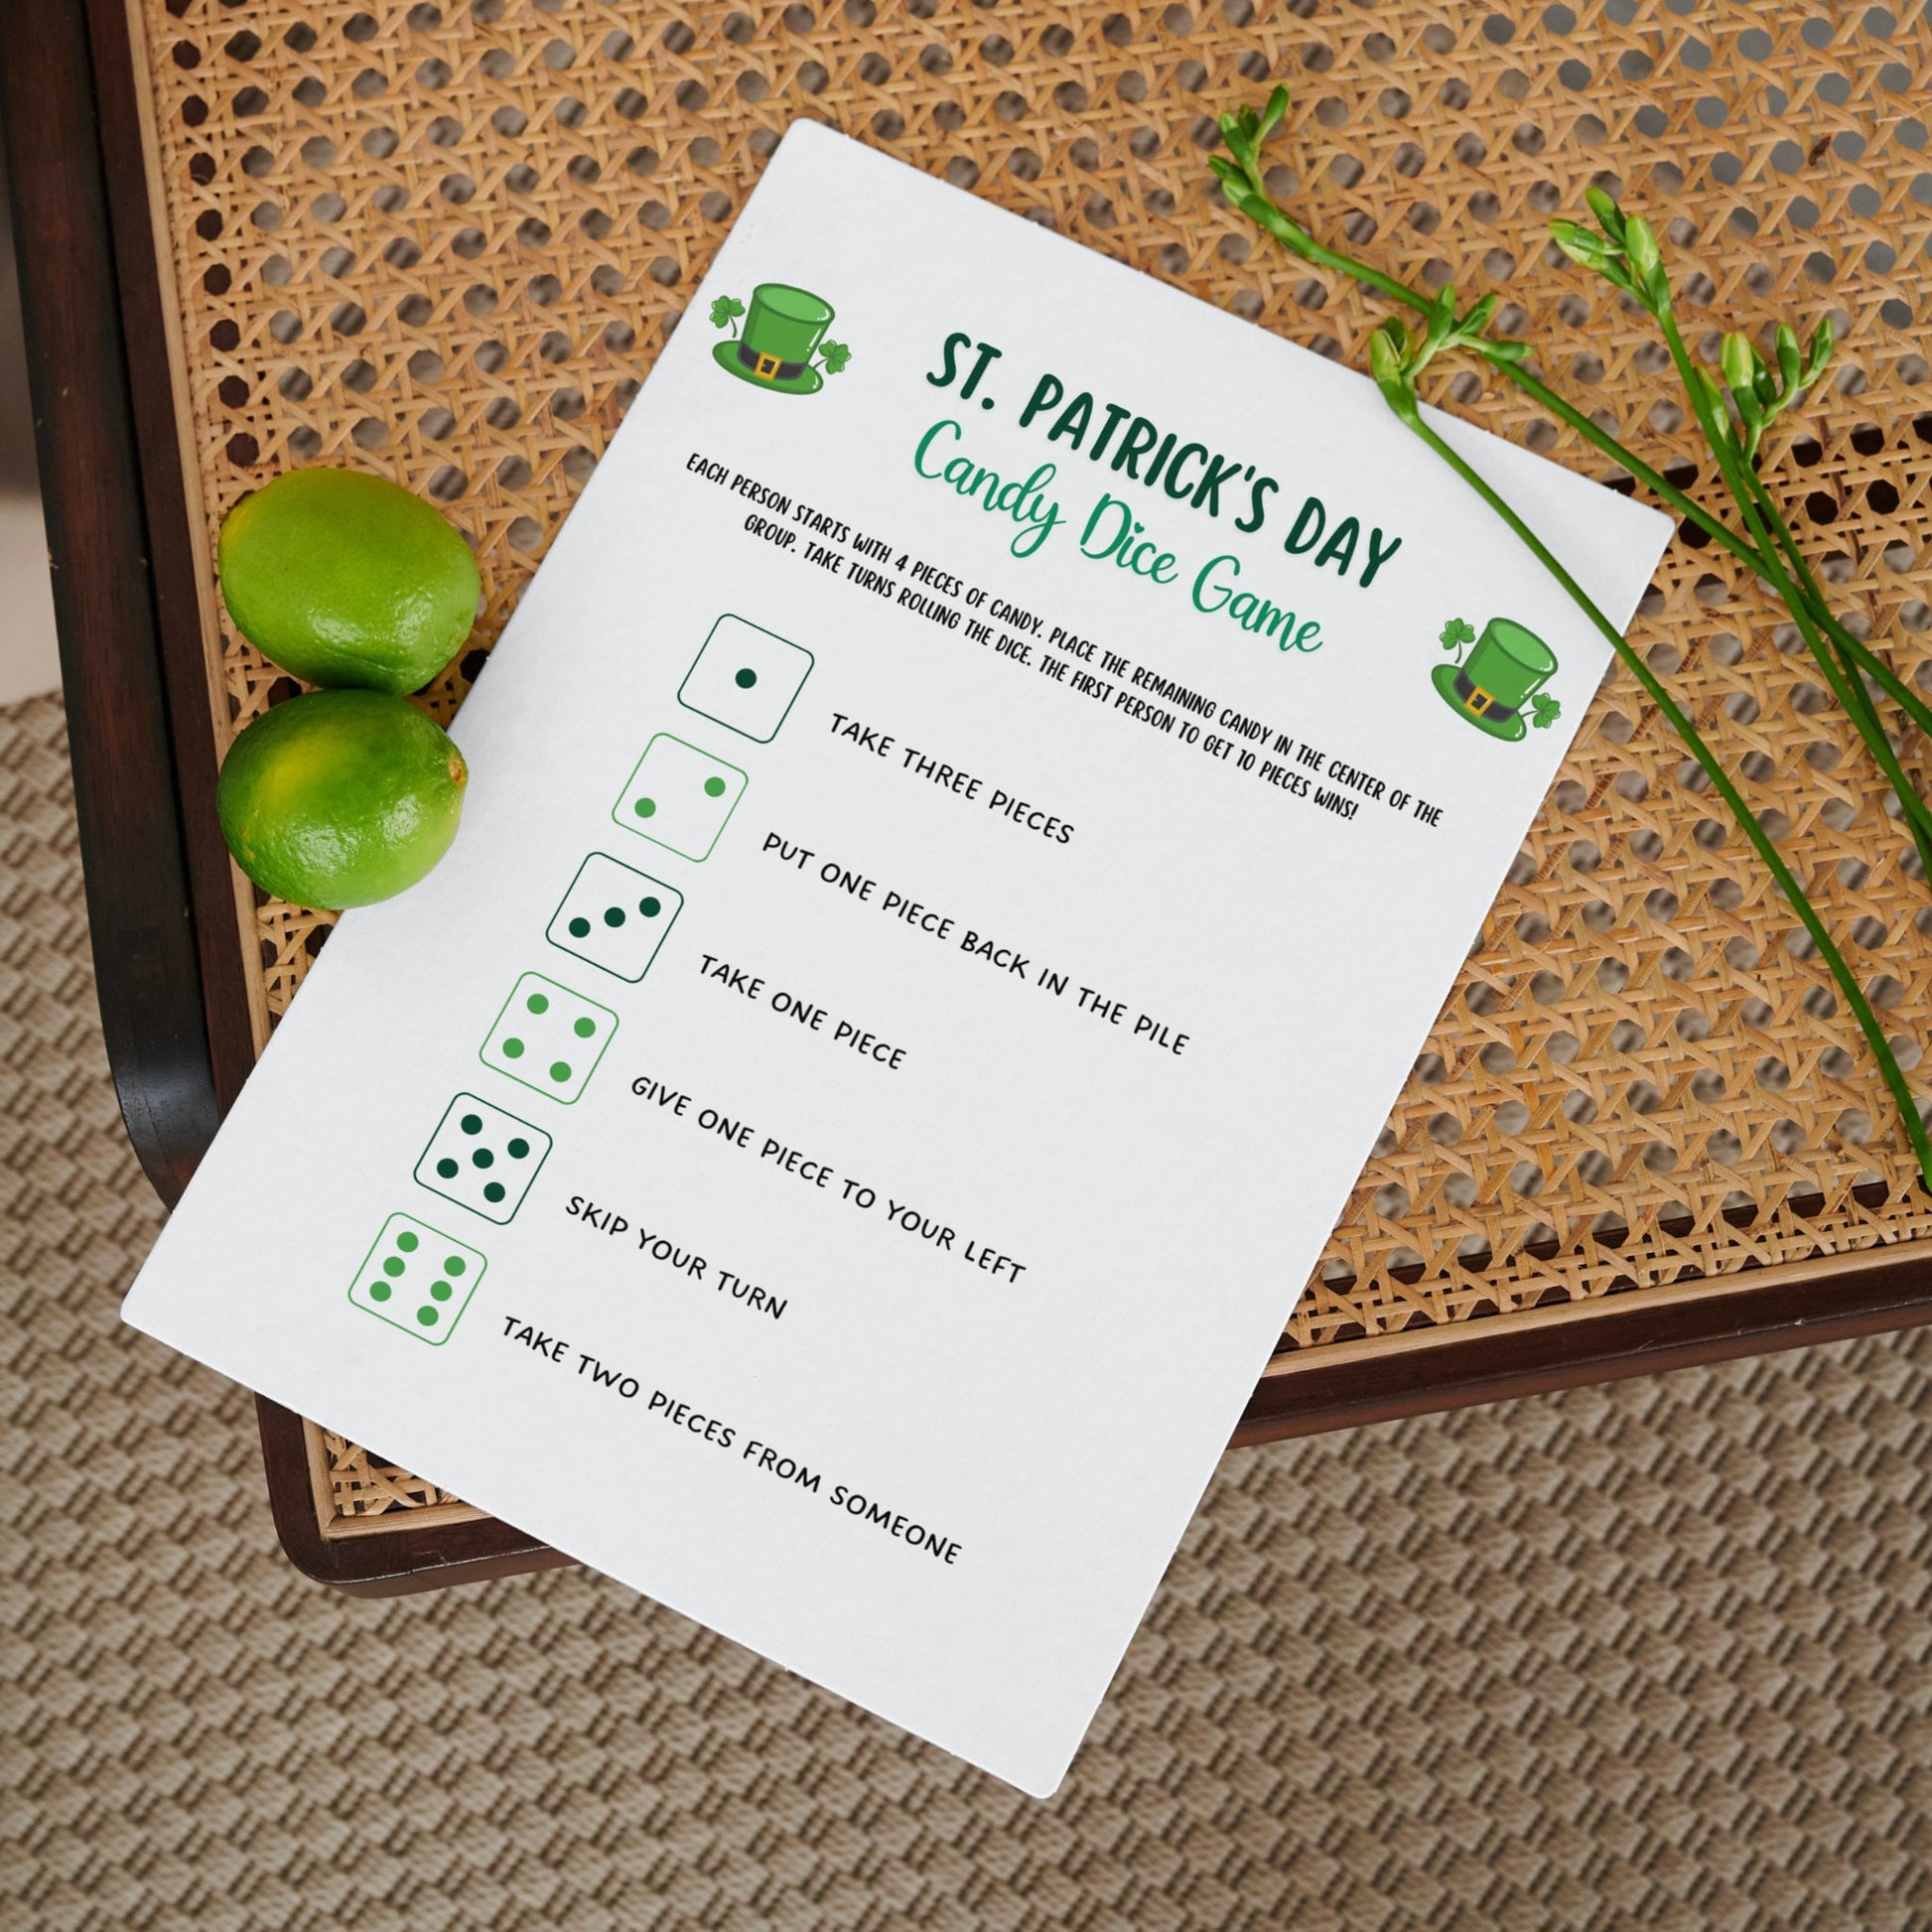 St Patrick's Day Candy Dice Game Printable, St Patty's Day Party Games for Kids, St Paddy's Day Classroom Game, Fun Activity Kids And Adults